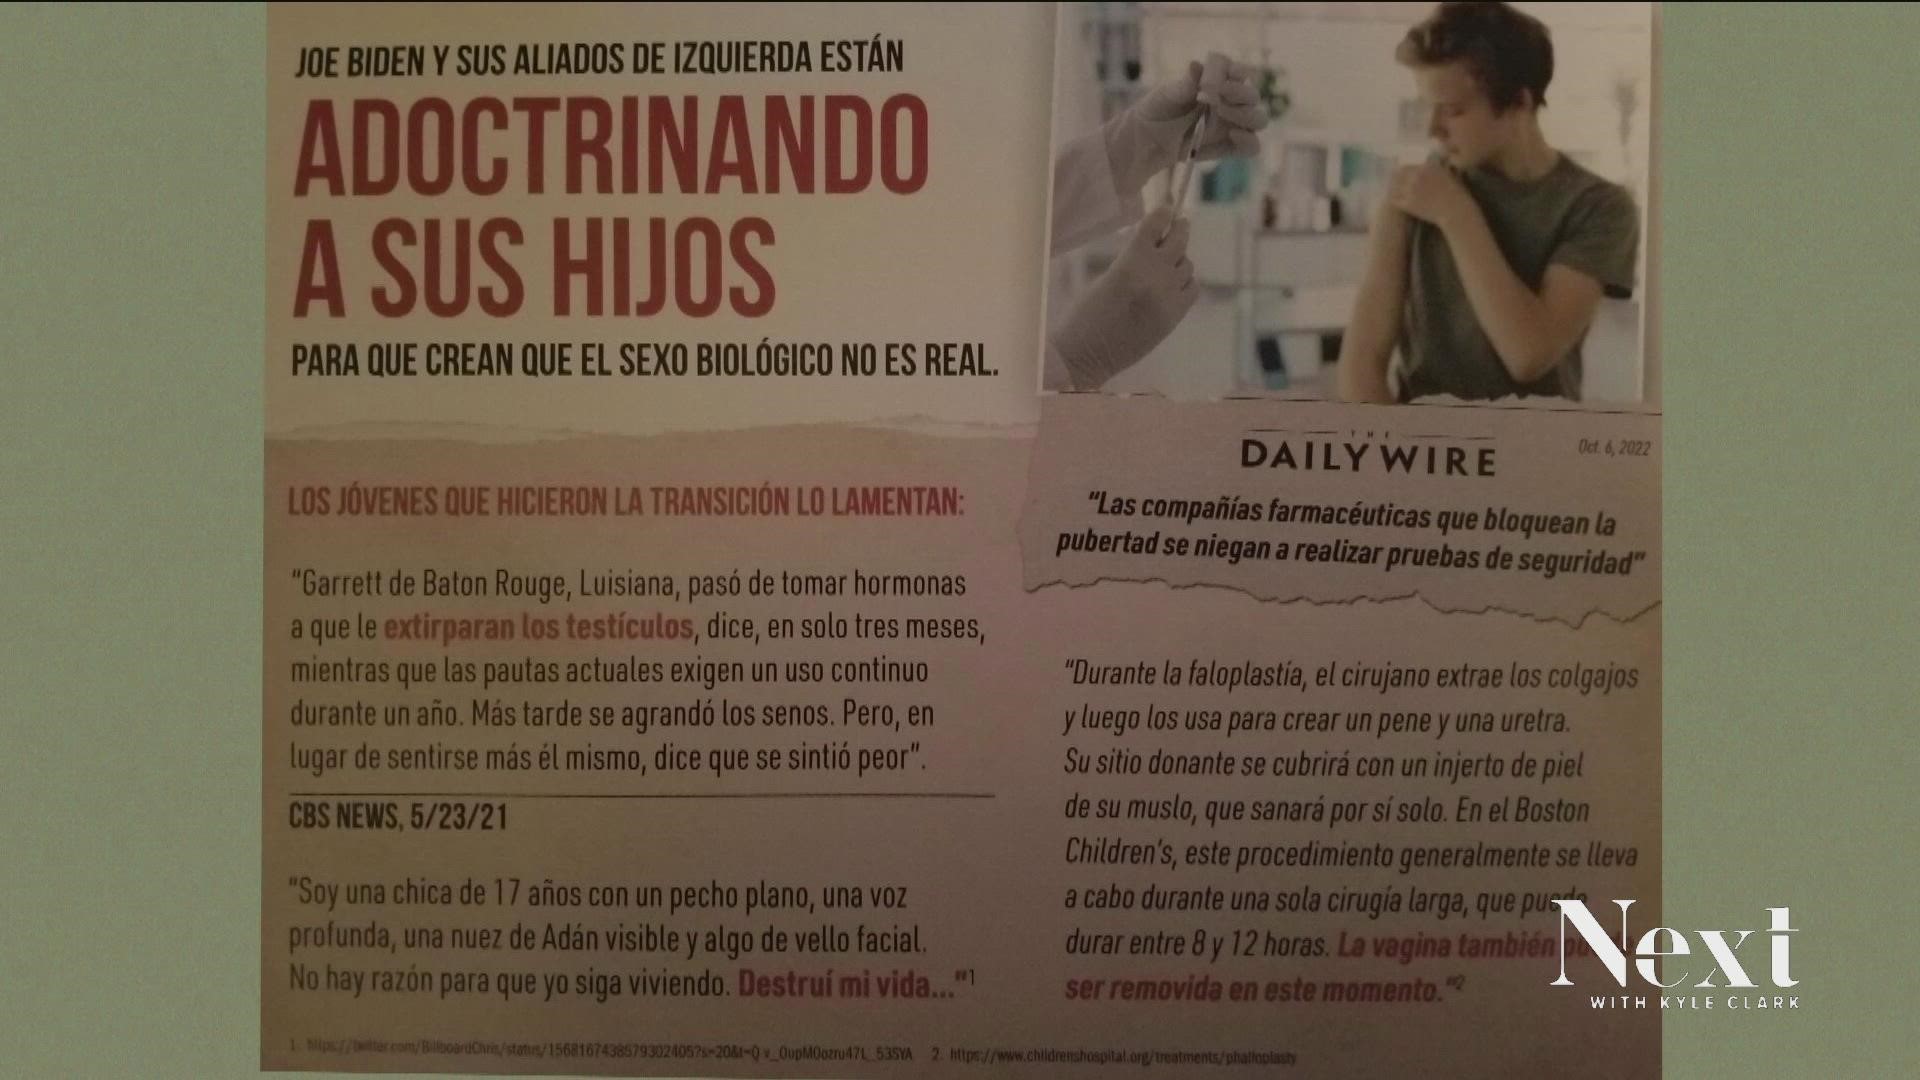 Anti-transgender messages printed in Spanish are being mailed to voters by a conservative dark money group.